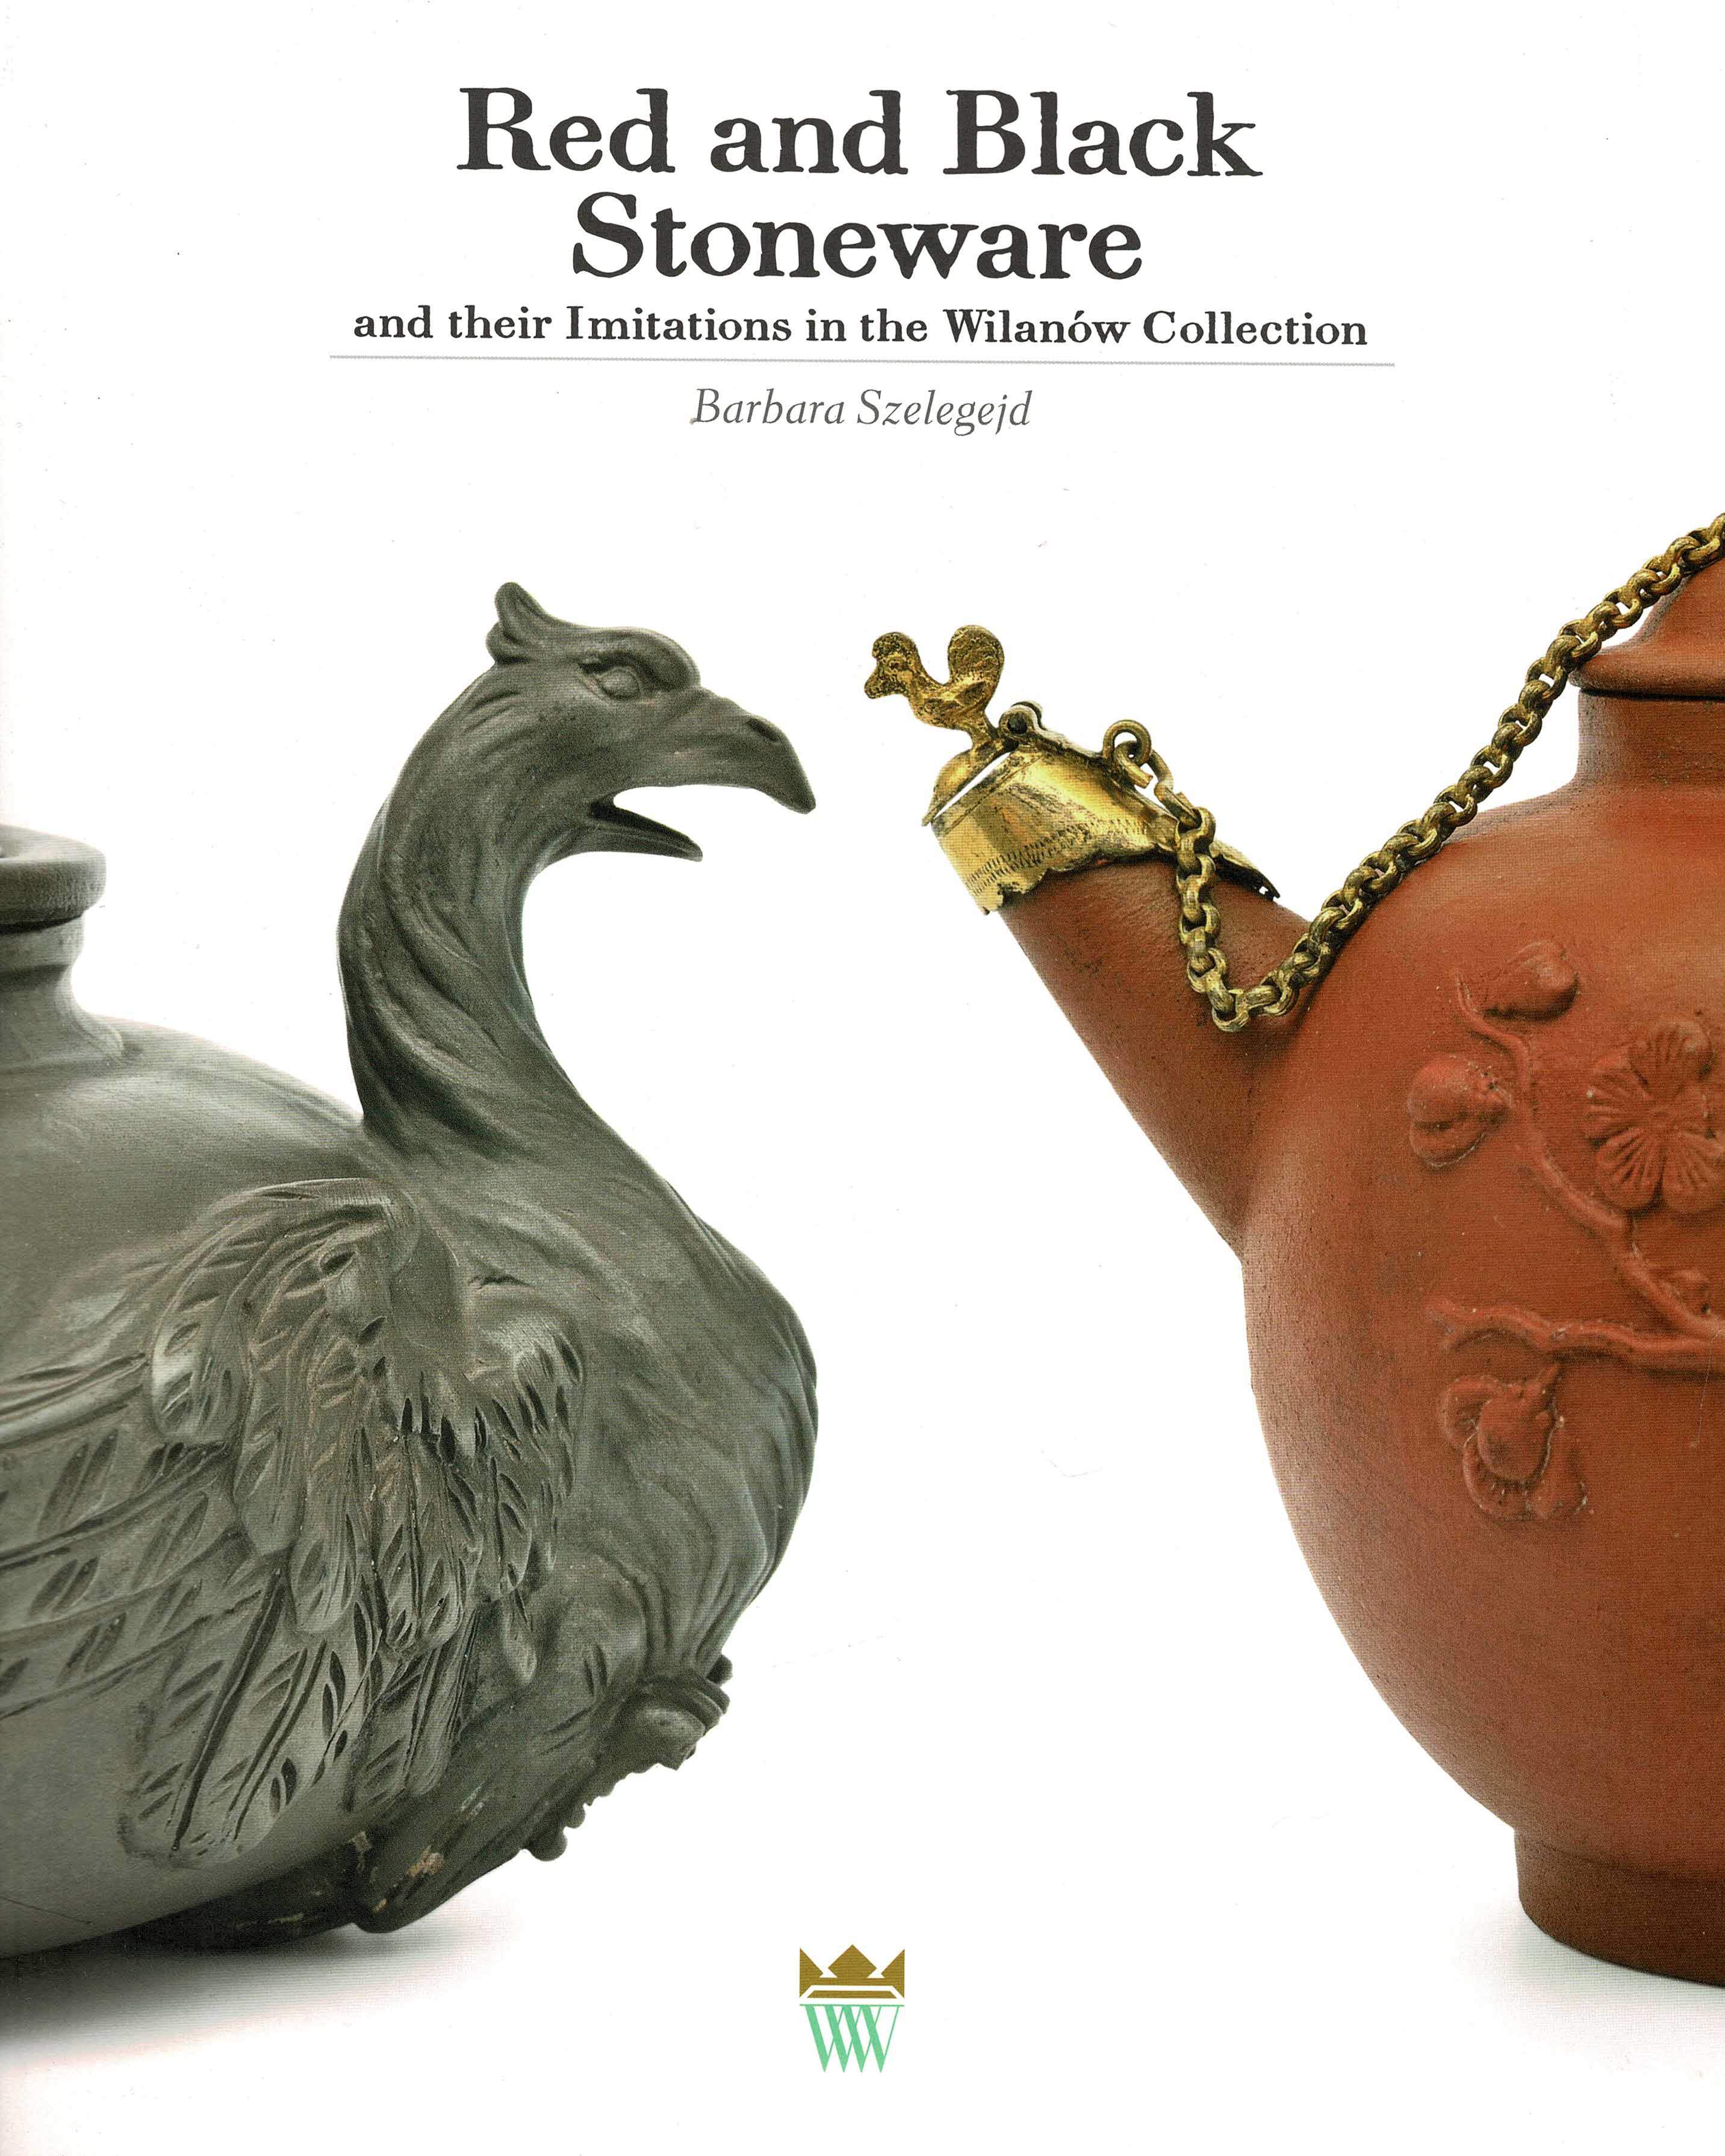 Szelegejd, Barbara - Red and Black Stoneware and their Imitations in the Wilanow Collection